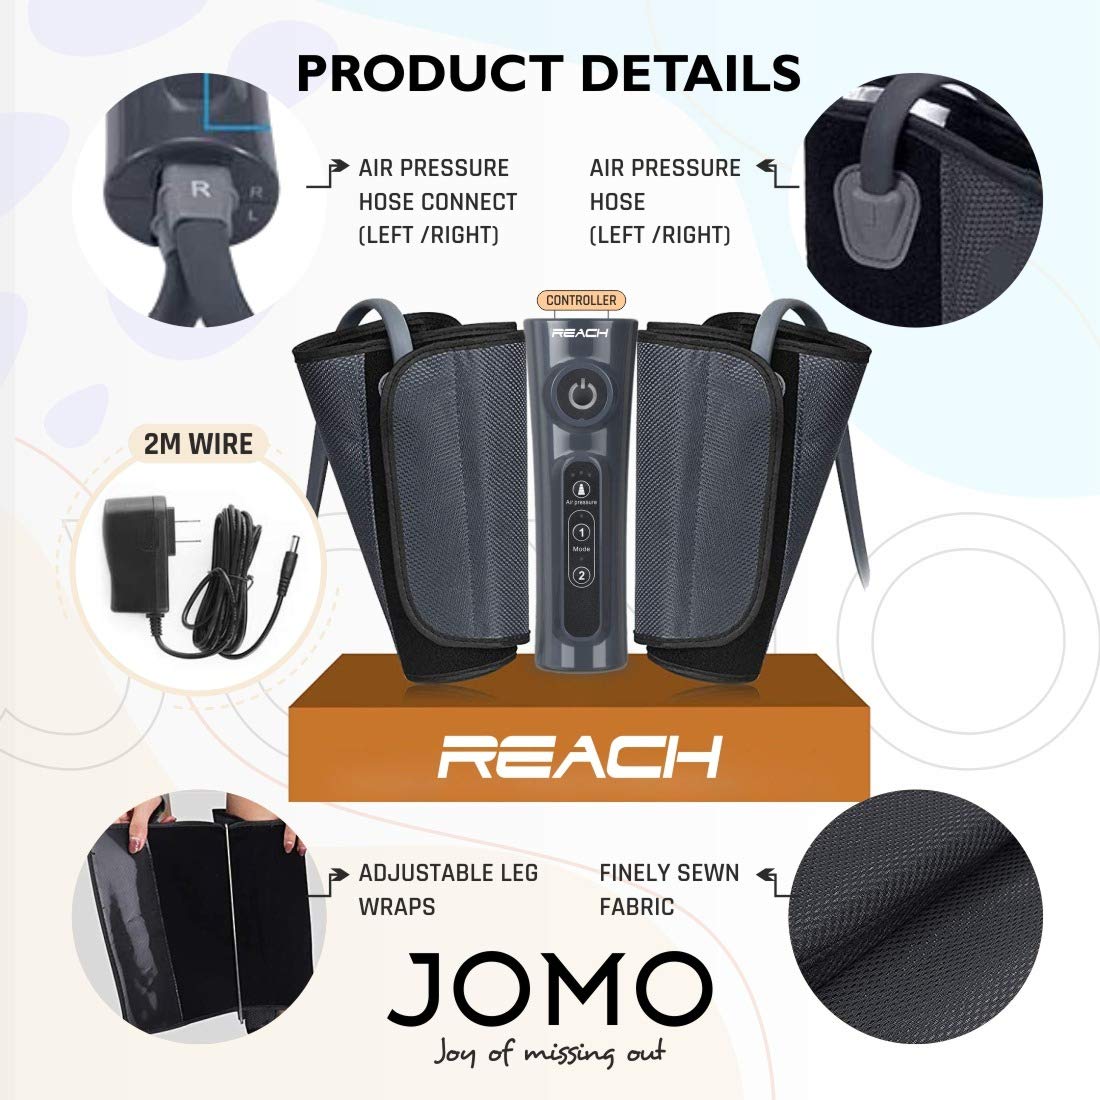 Reach Jomo Leg, Calf & Foot Massager | Air Compression Leg Massager for Pain Relief, Muscle Relaxation and Blood Circulation Portable Air Pressure Massager (Jomo)